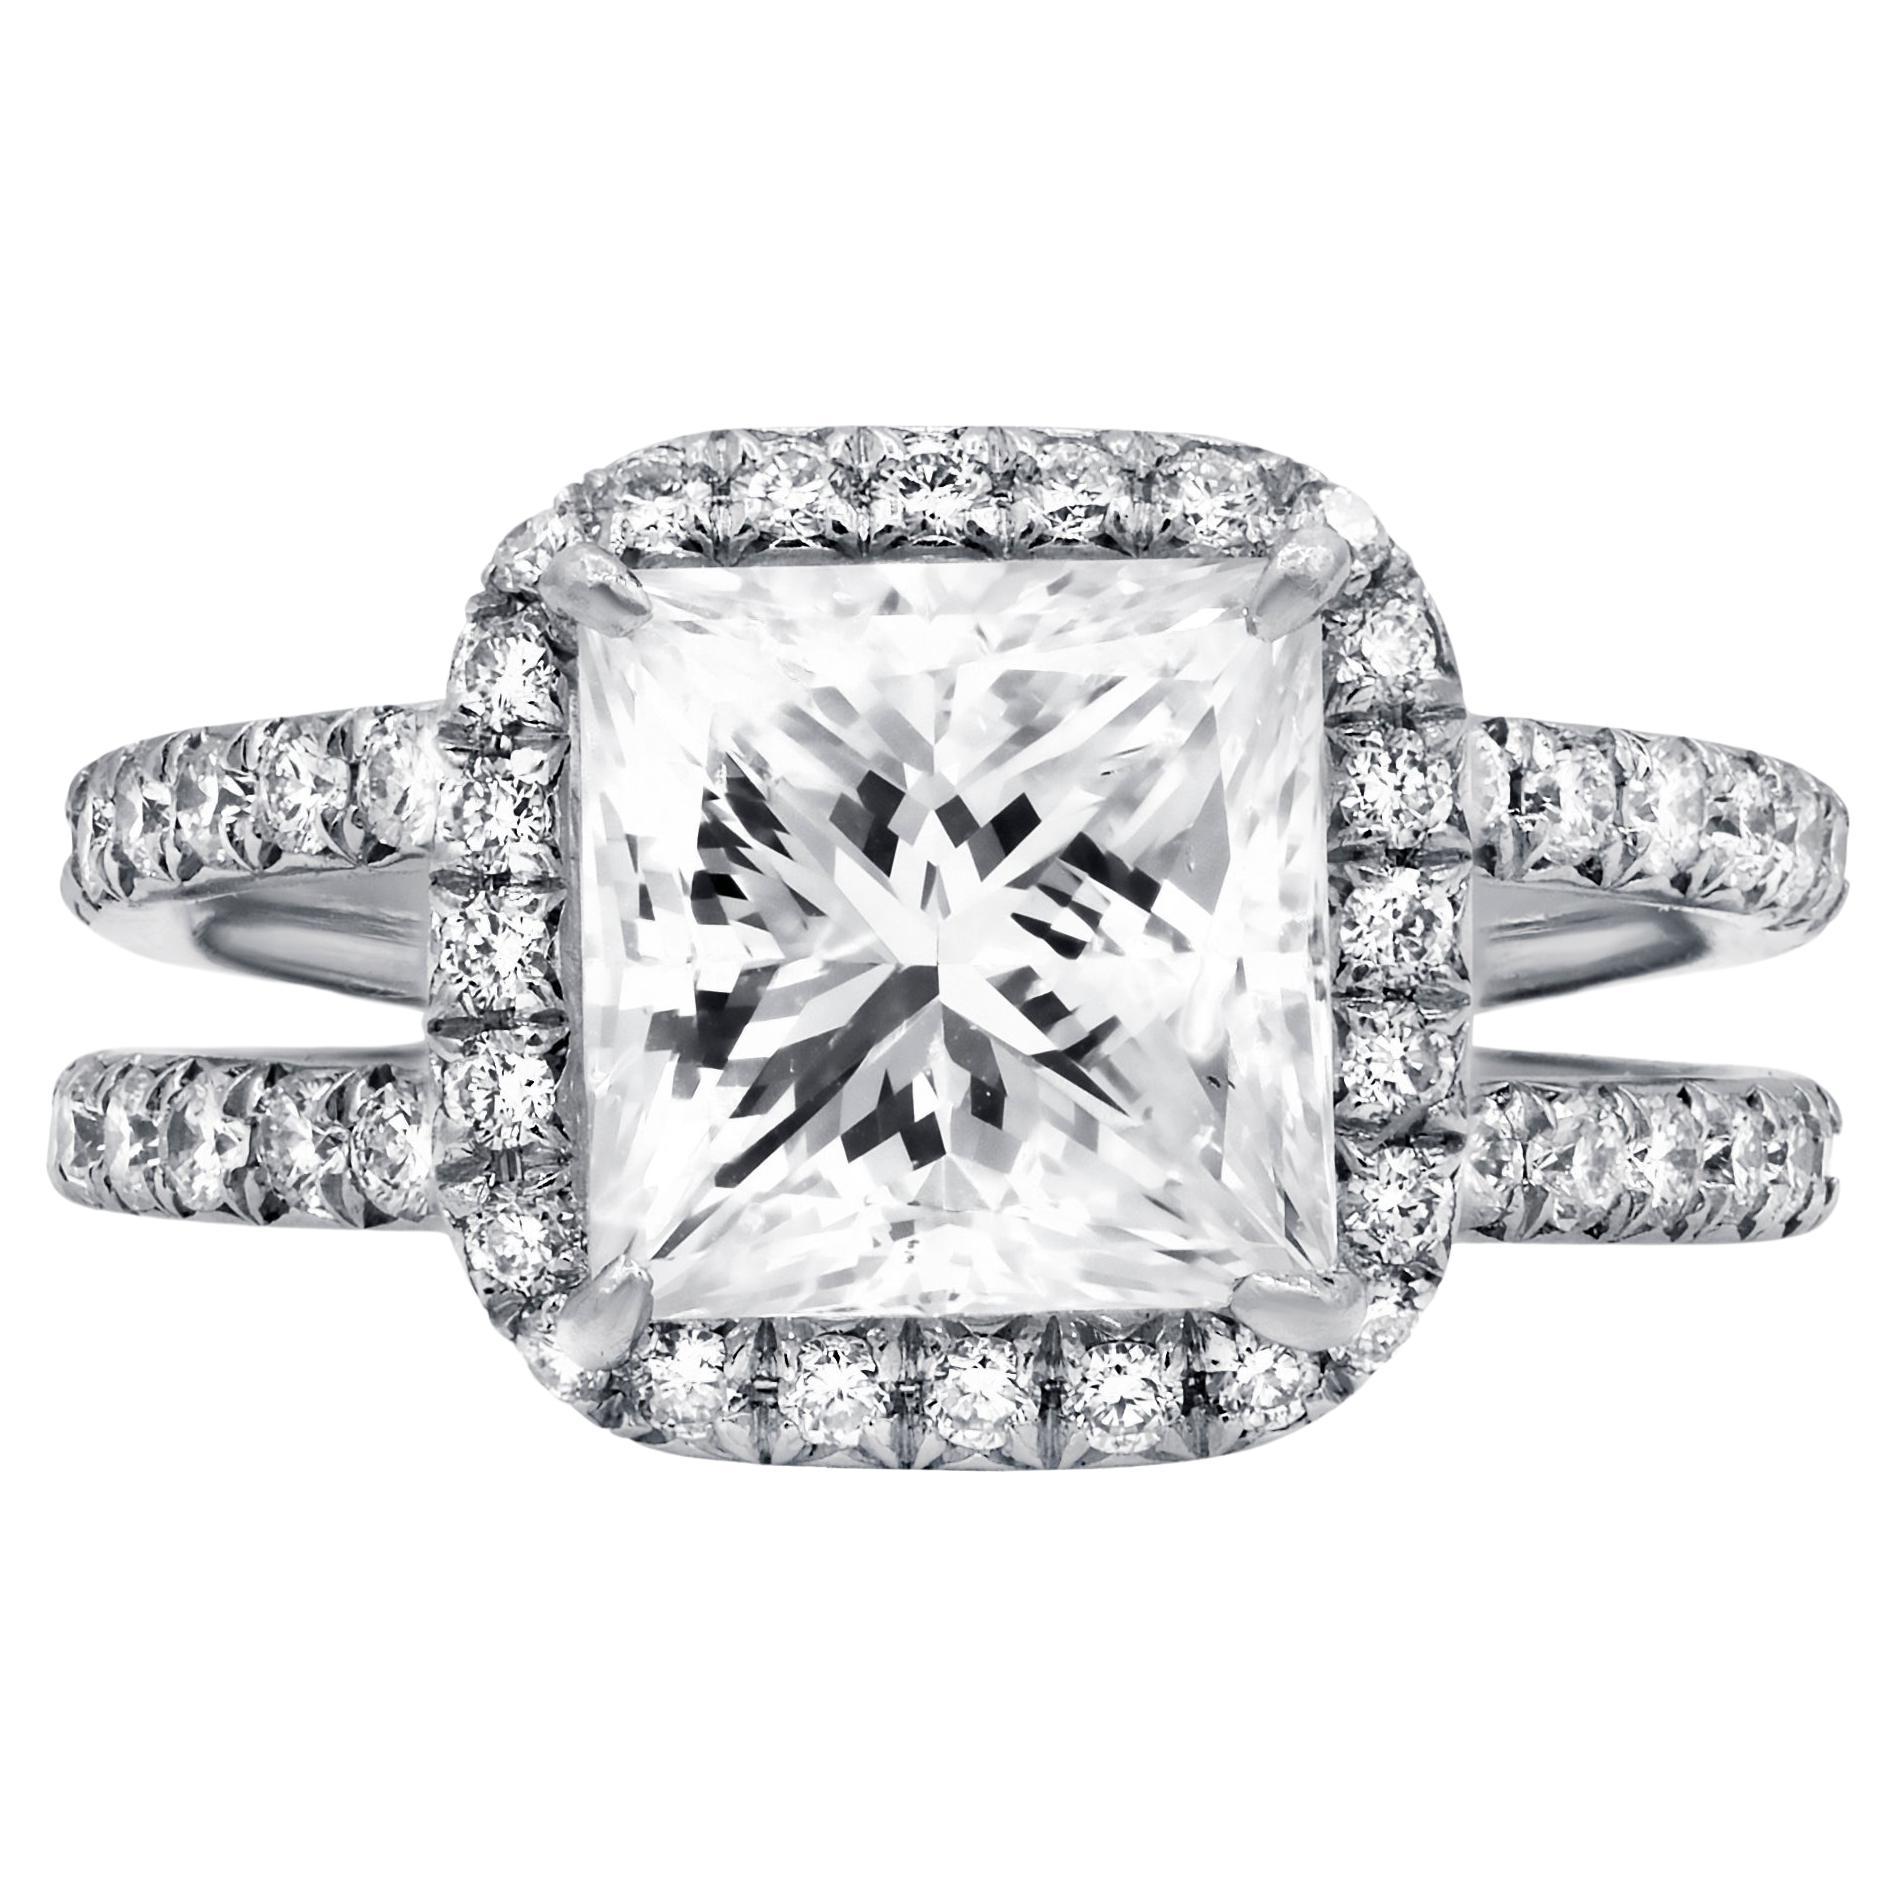 Platinum engagement ring featuring a center 3.00 ct GIA certified (GIA#13280902) (G-VS2) princess cut diamond surrounded by 1.40 cts tw of diamonds in a halo design 
Diana M. is a leading supplier of top-quality fine jewelry for over 35 years.
Diana